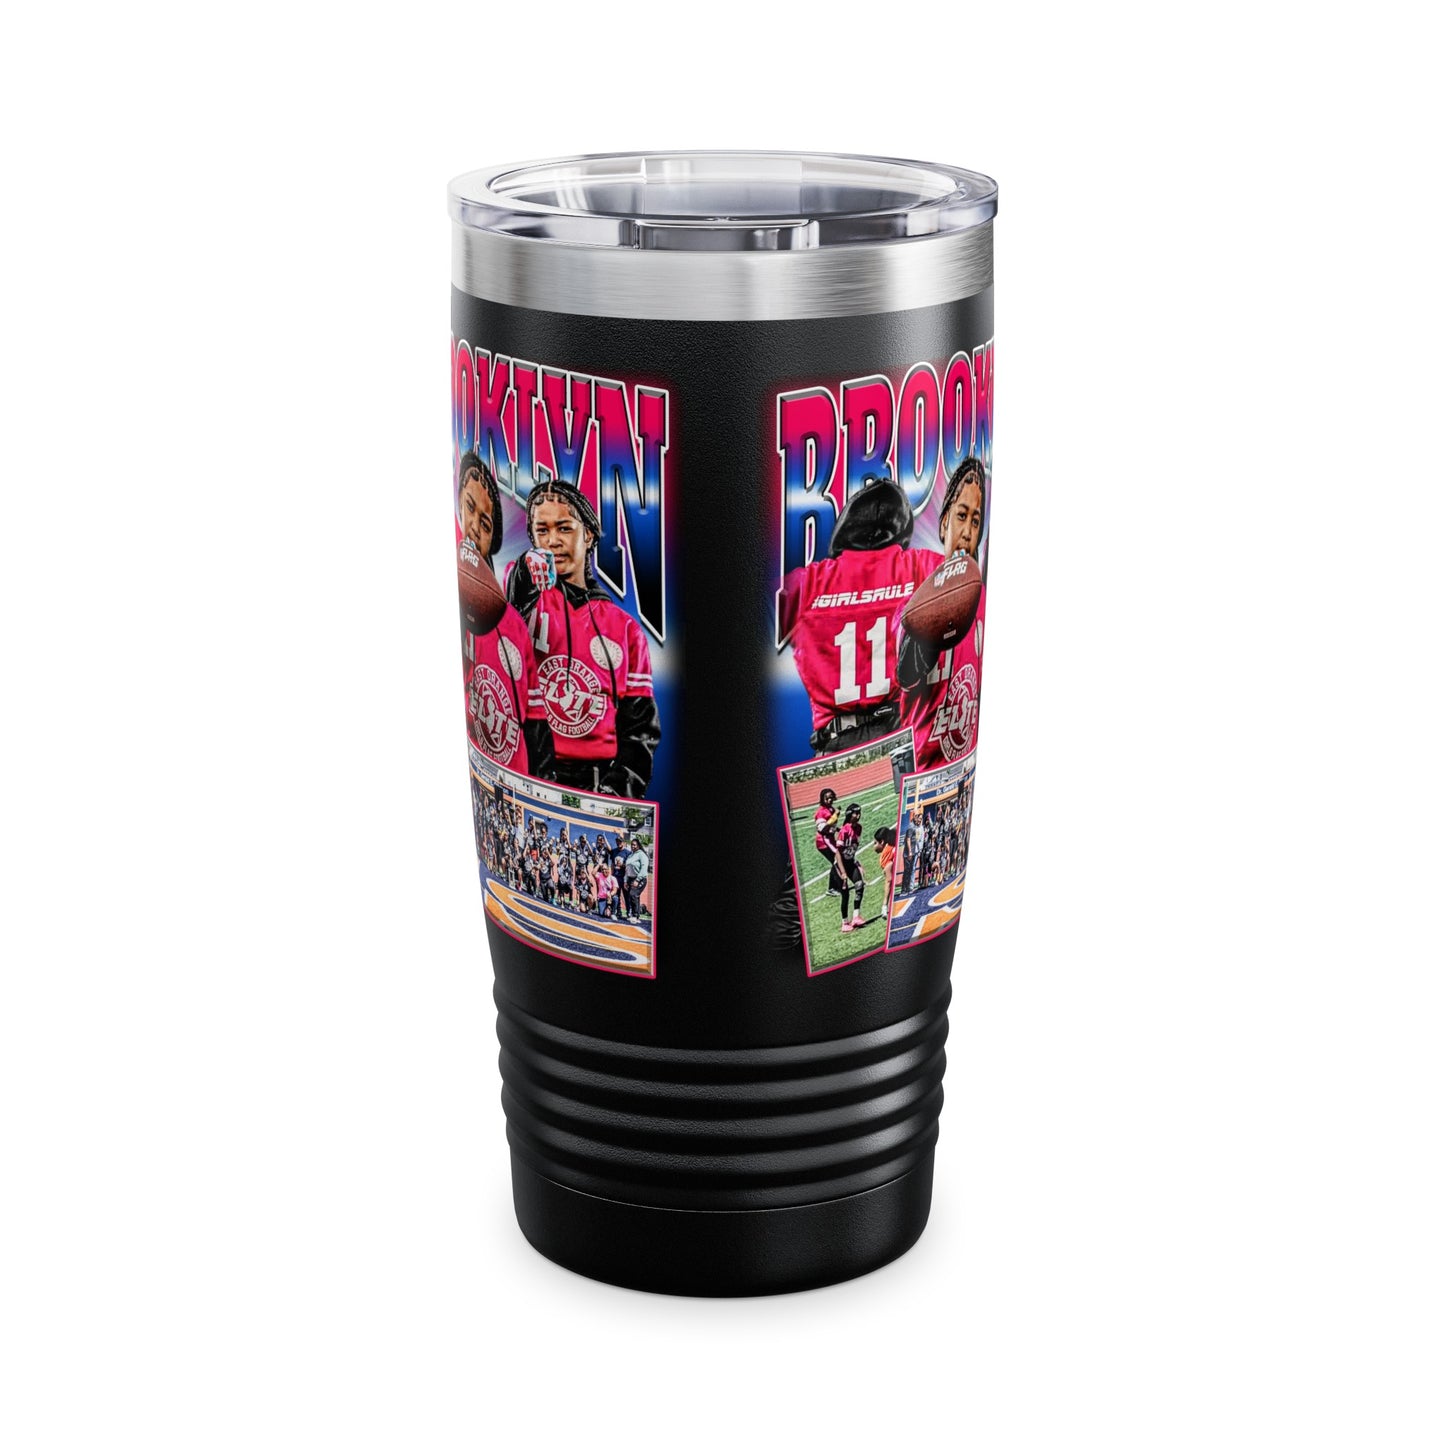 Brooklyn Stainless Steal Tumbler